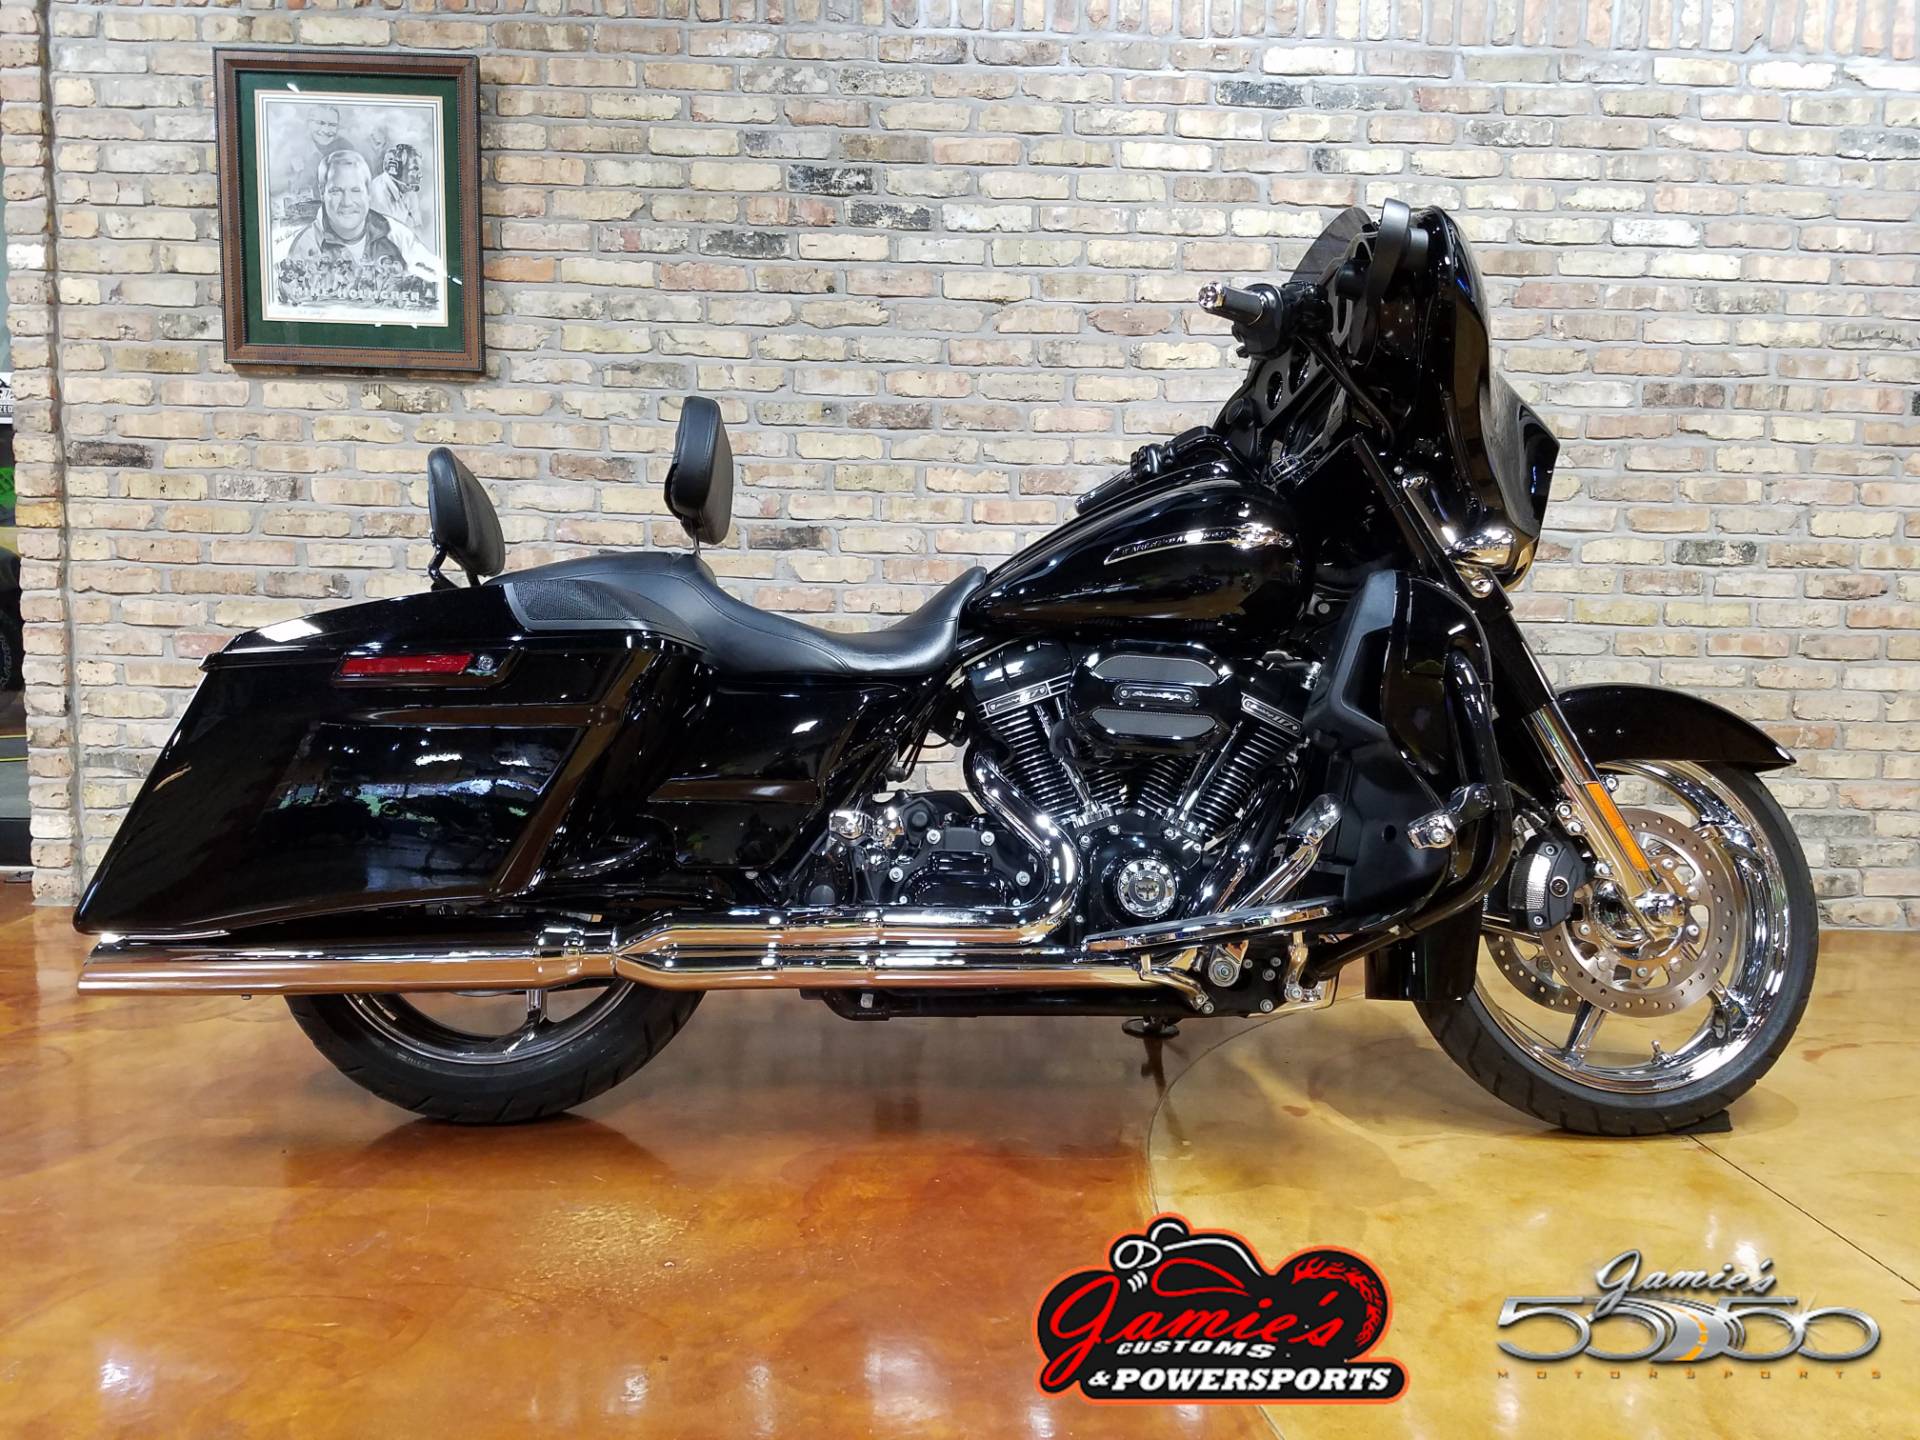 Used 2015 Harley Davidson Cvo Street Glide Motorcycles In Big Bend Wi 4326 Starfire Black Gold Dust Flames